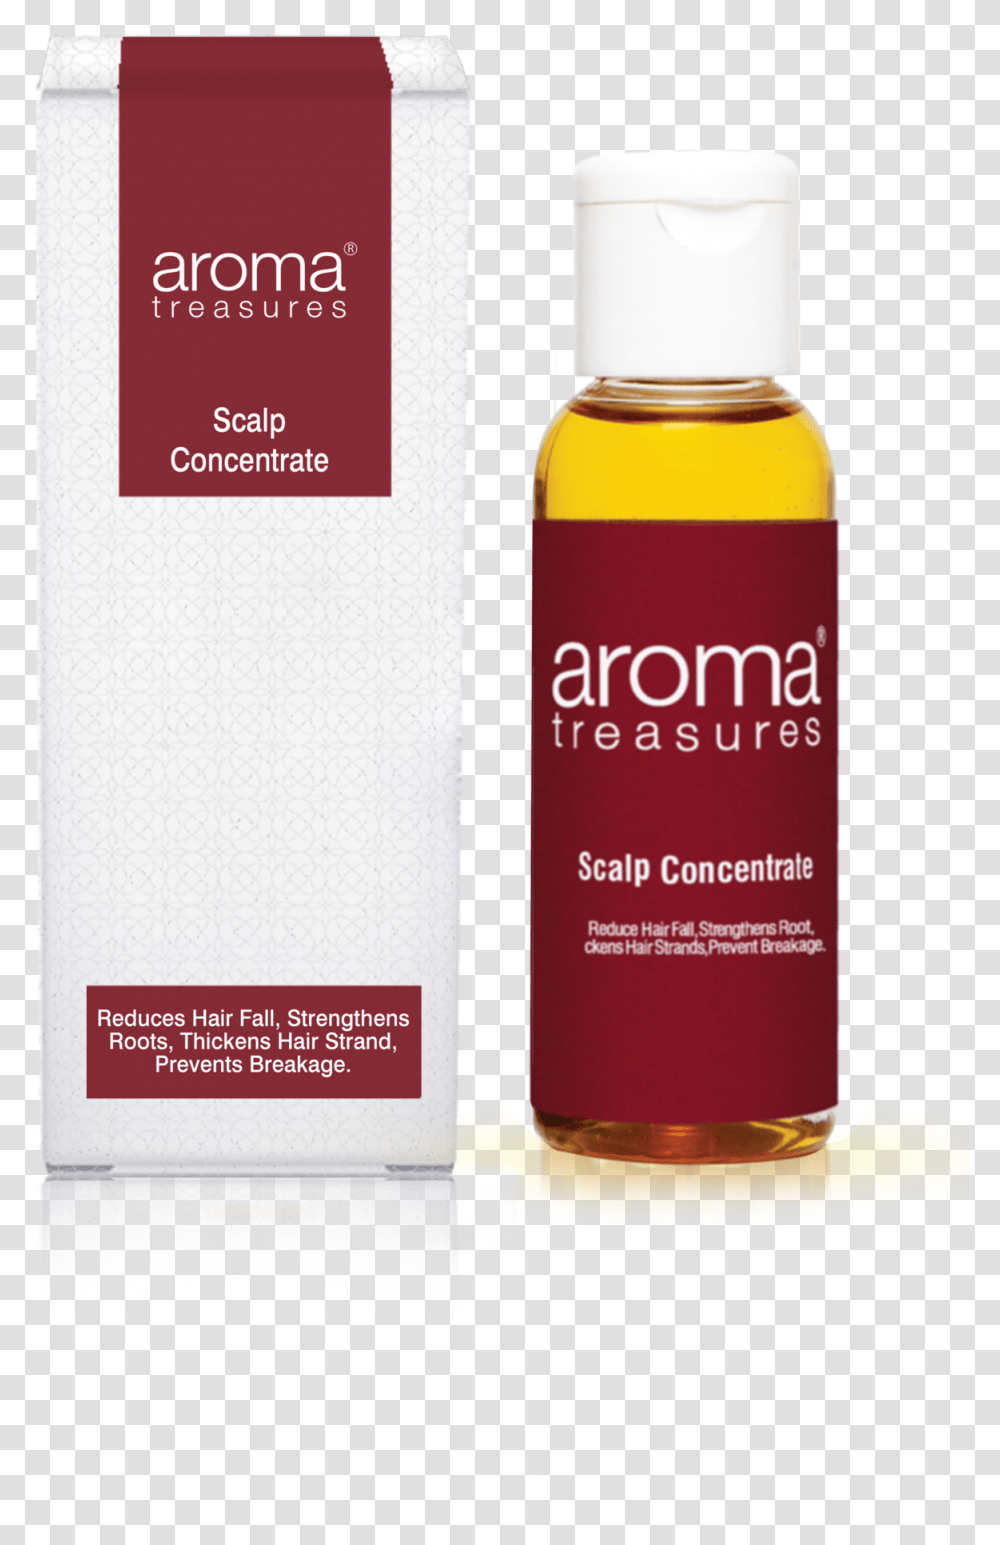 Aroma Treasures Scalp Concentrate Cosmetics, Bottle, Beer, Alcohol, Beverage Transparent Png